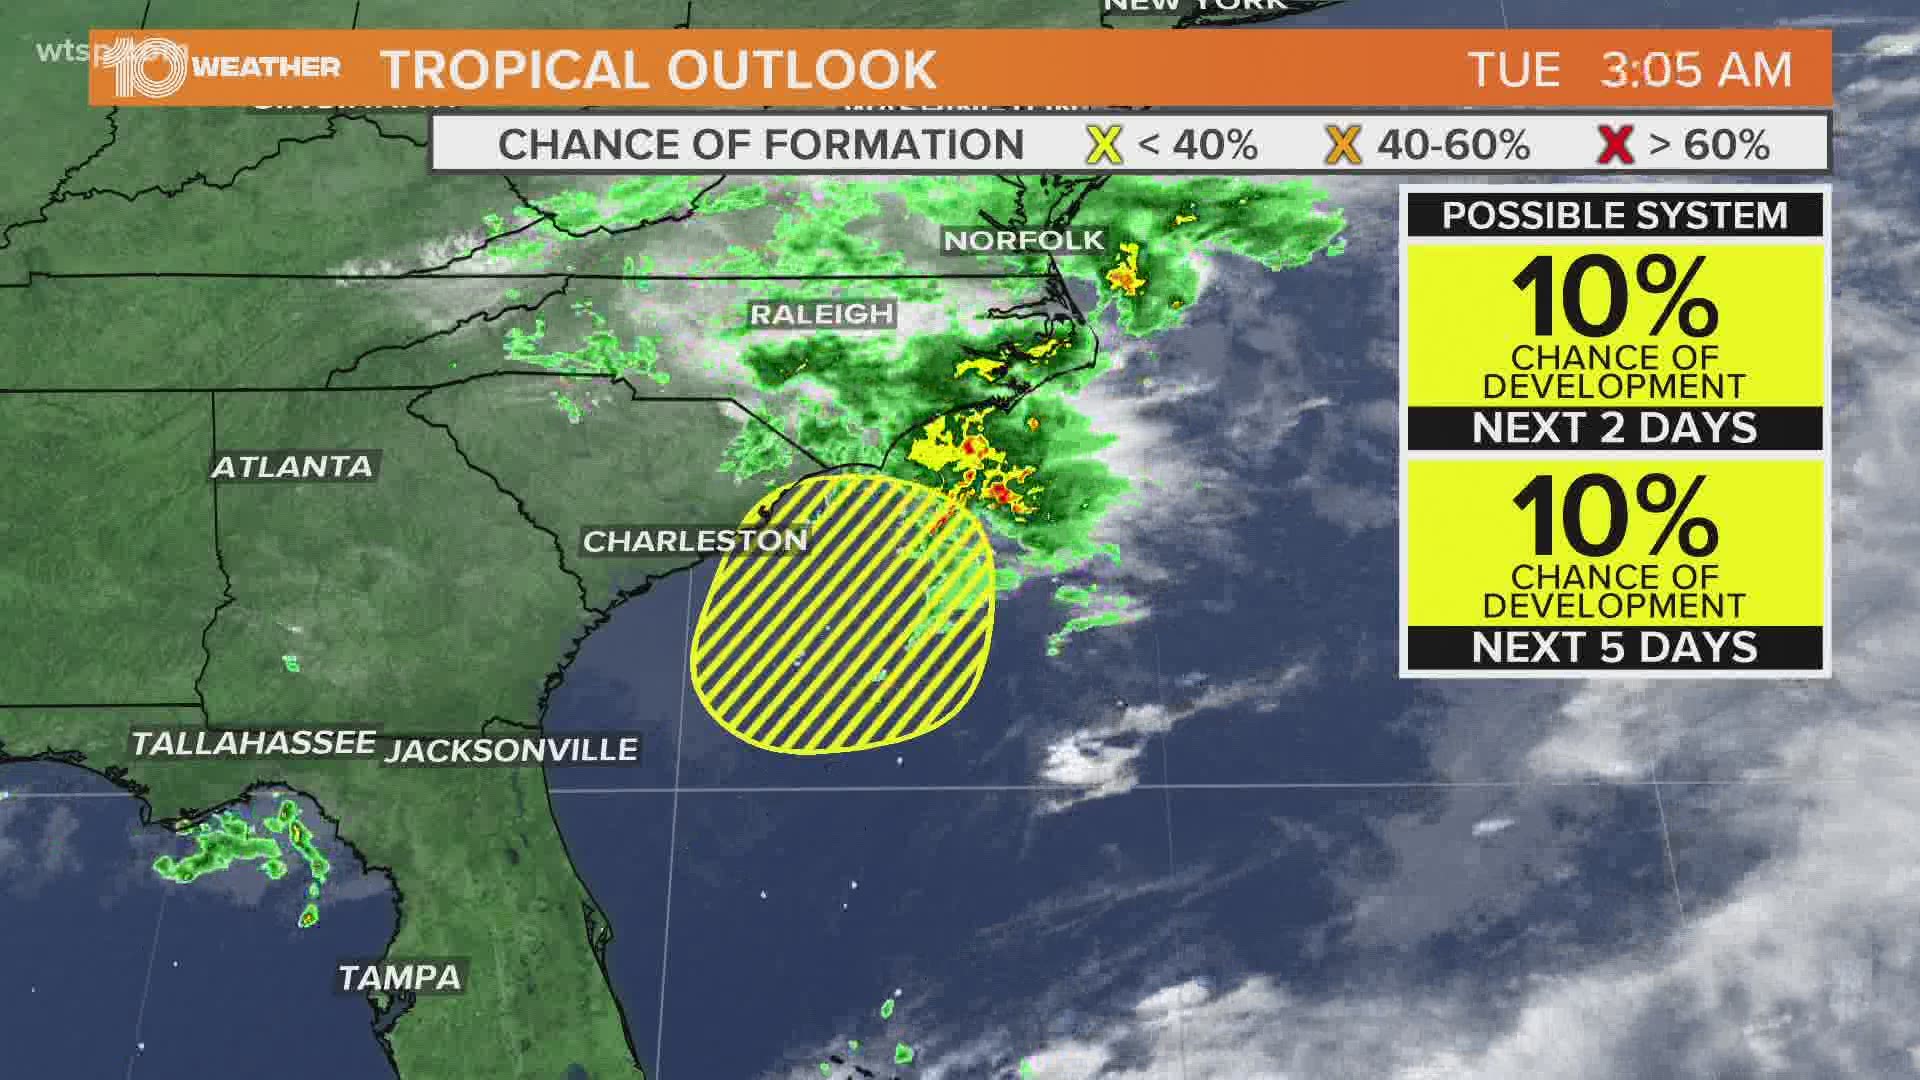 North Carolina is getting some heavy rain from a low pressure system as it moves inland.